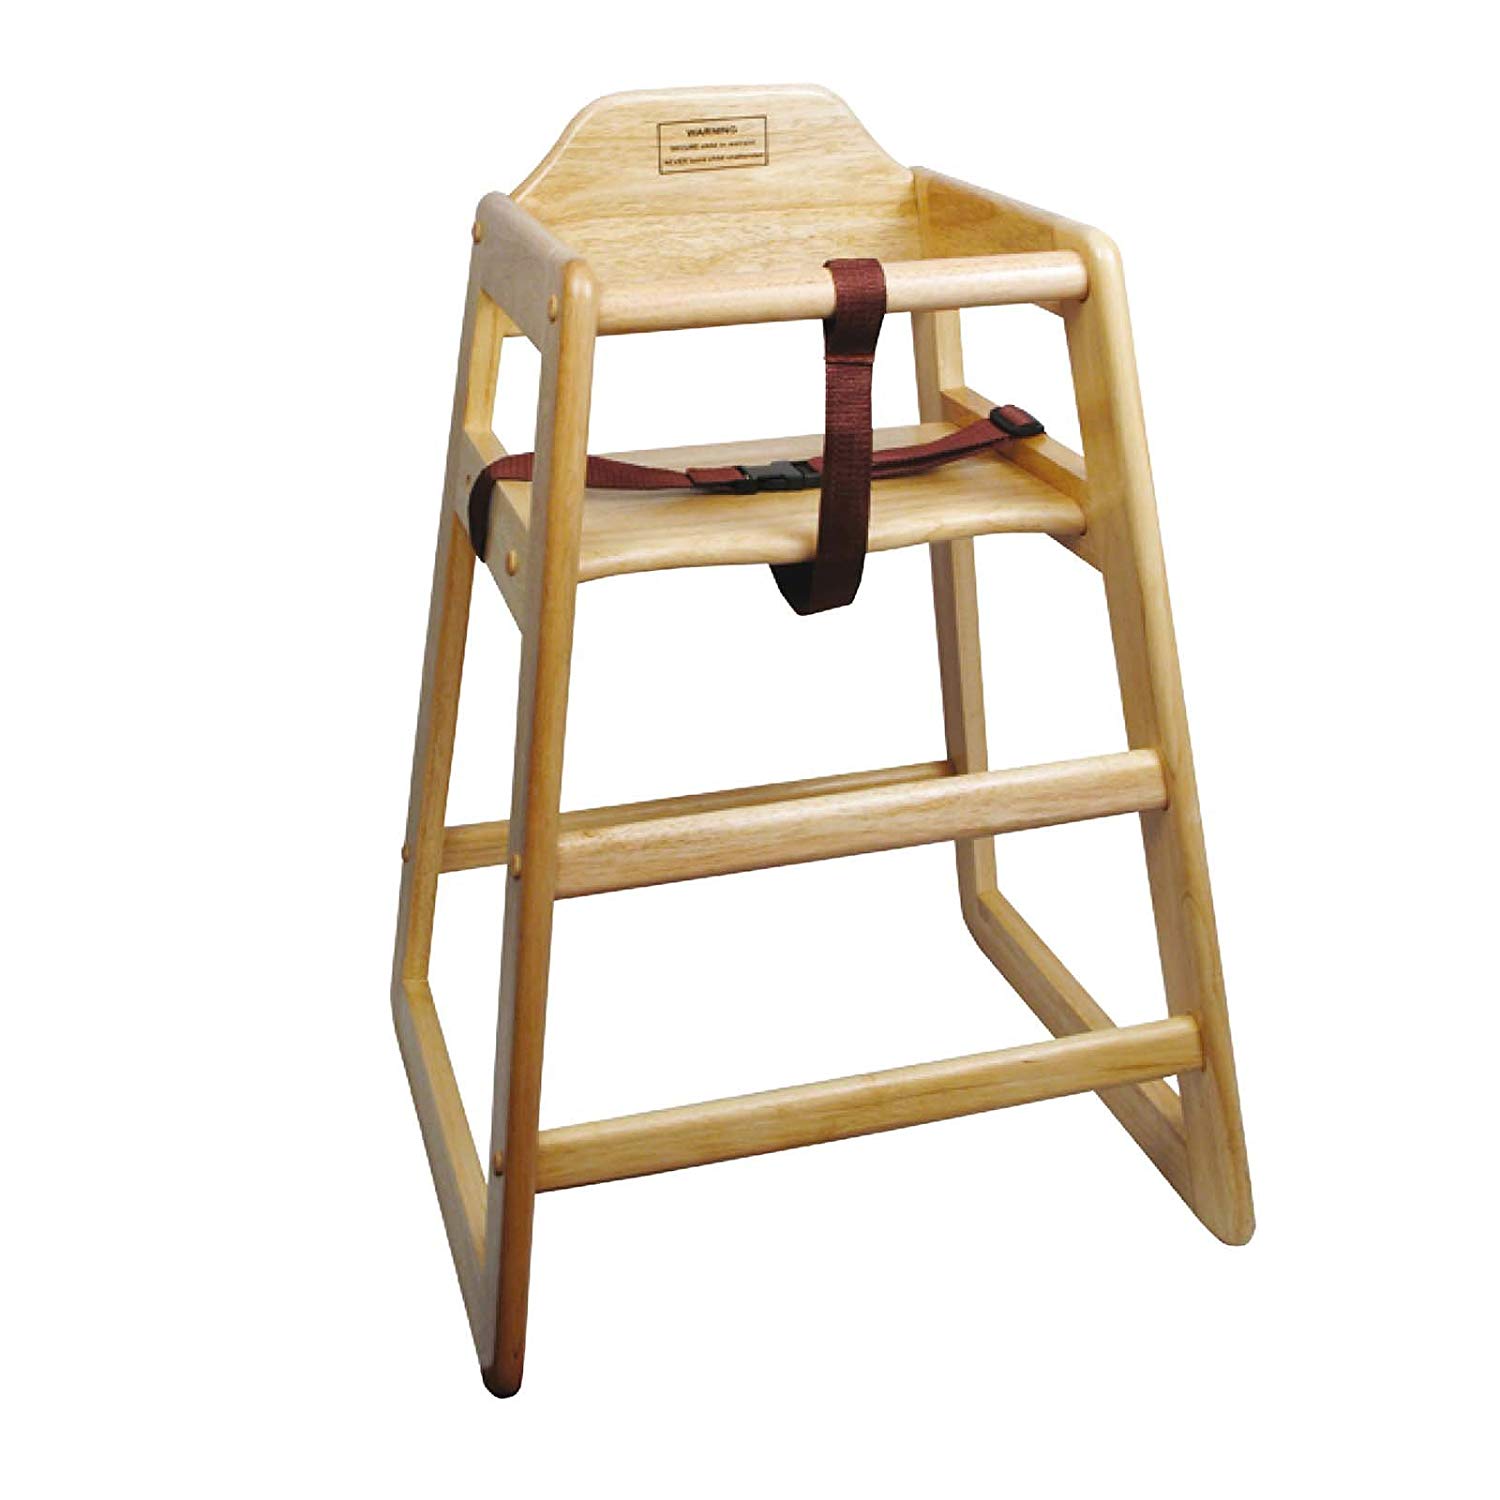 Winco CHH-101 Unassembled Wooden High Chair, Natural